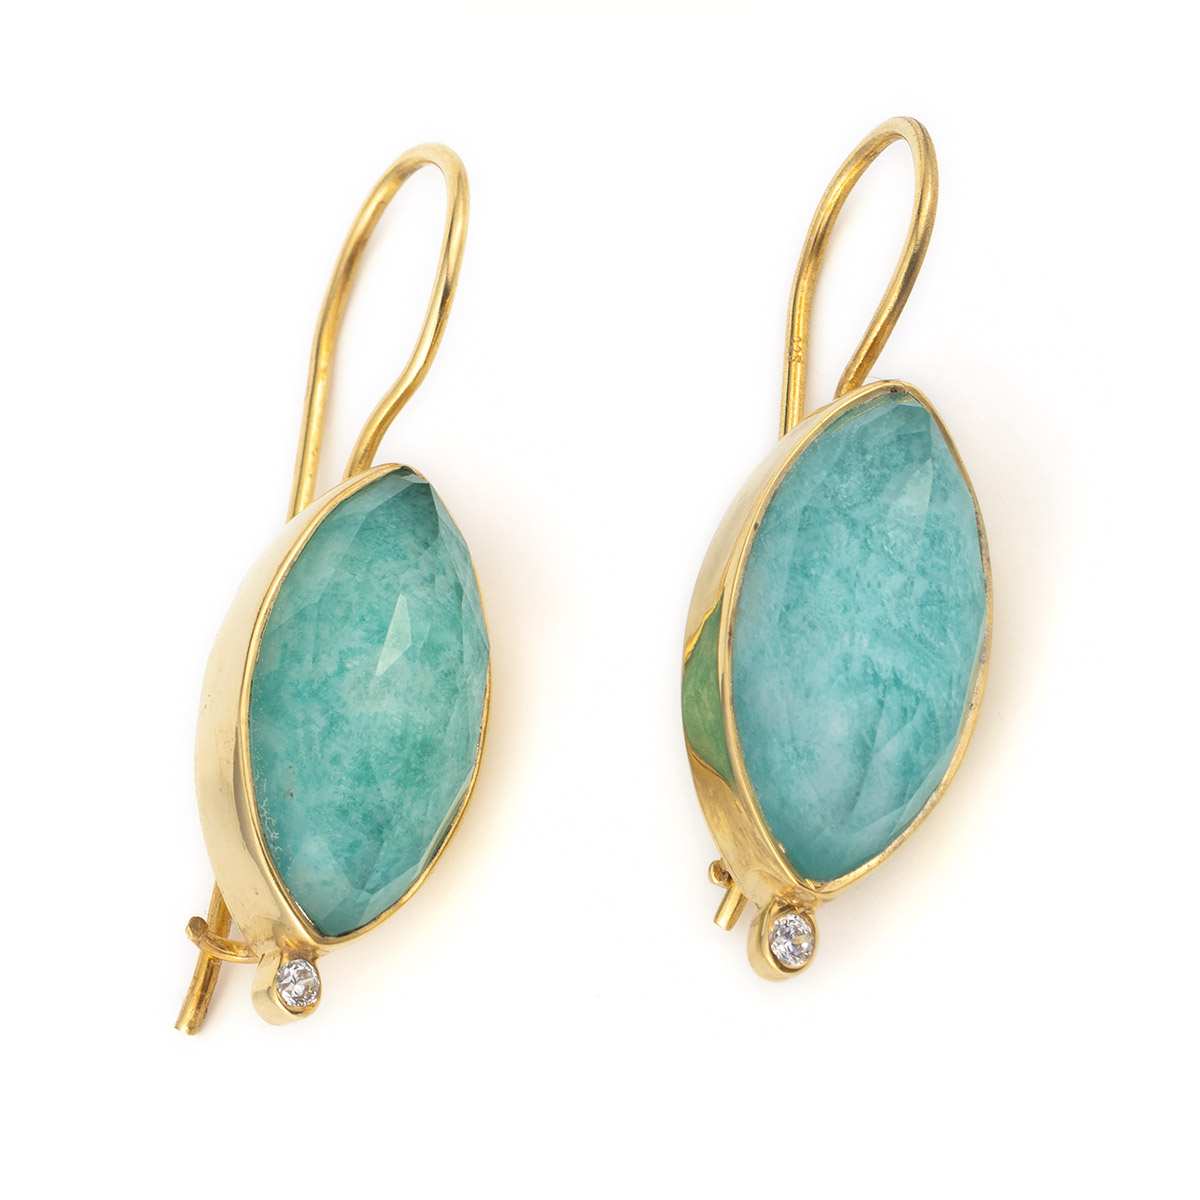 Amazonite Doublet Drop Earrings - Sterling Silver and Gold Plated